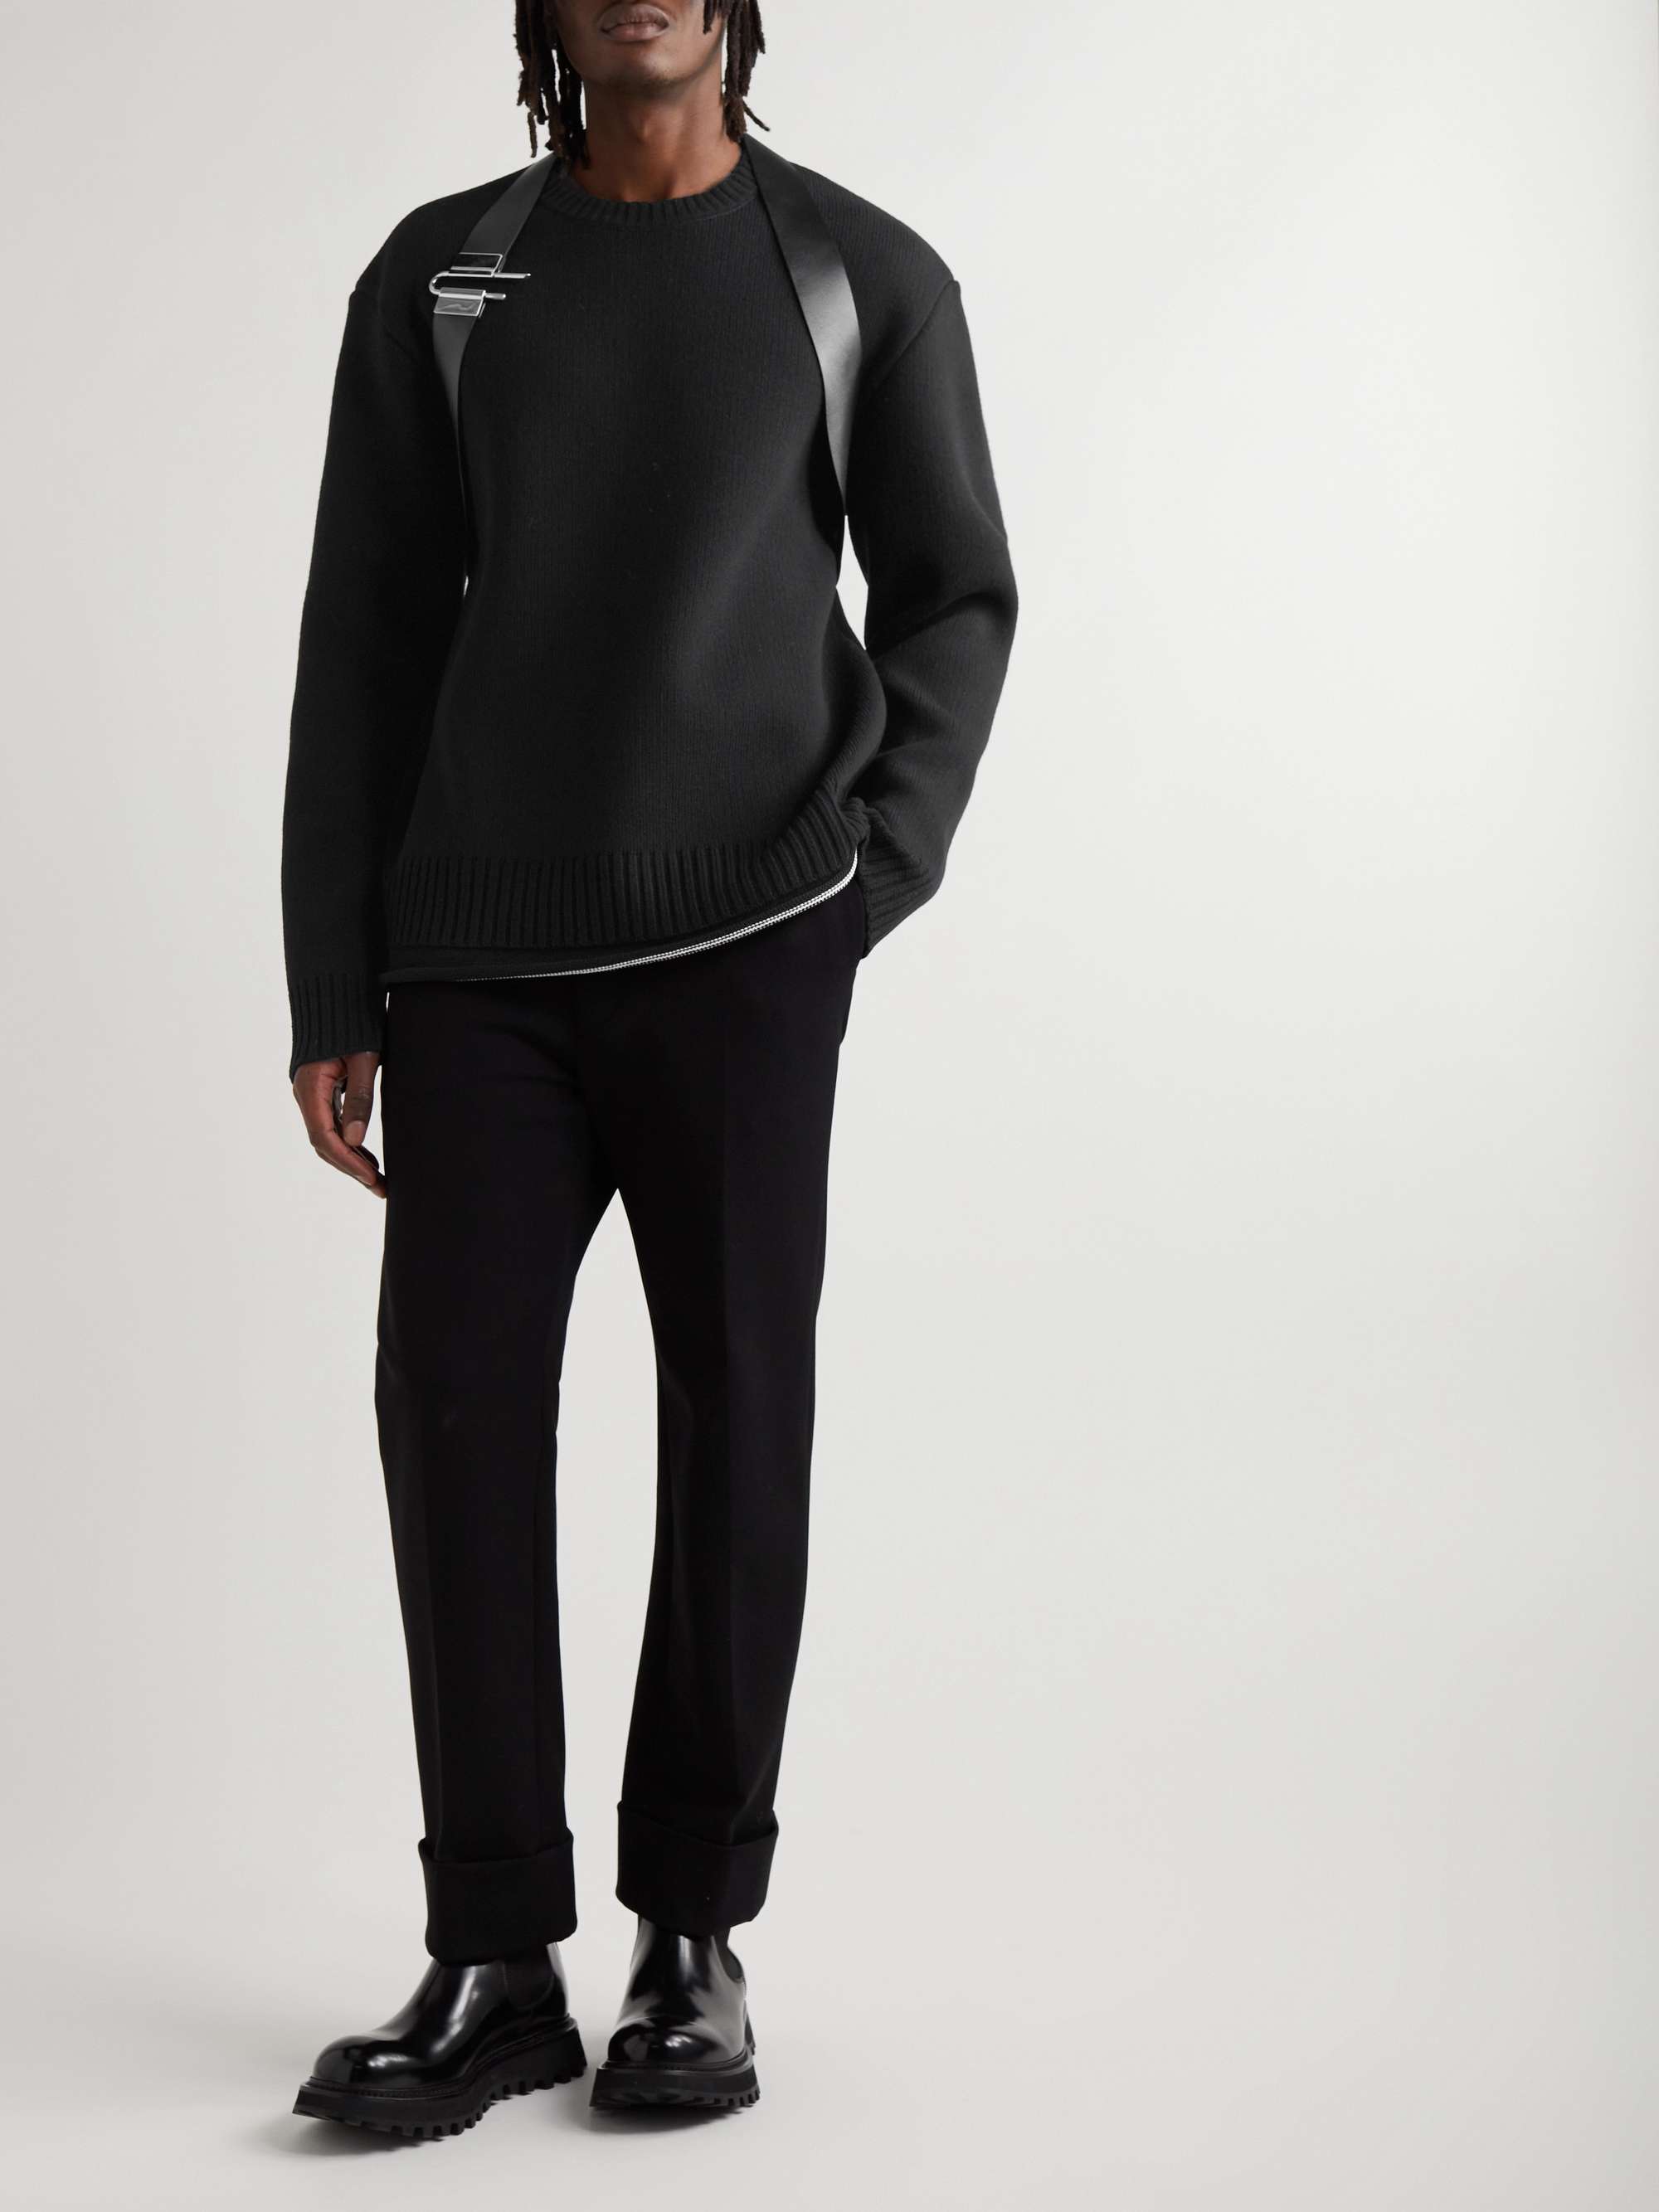 GIVENCHY Embellished Leather-Trimmed Wool Sweater